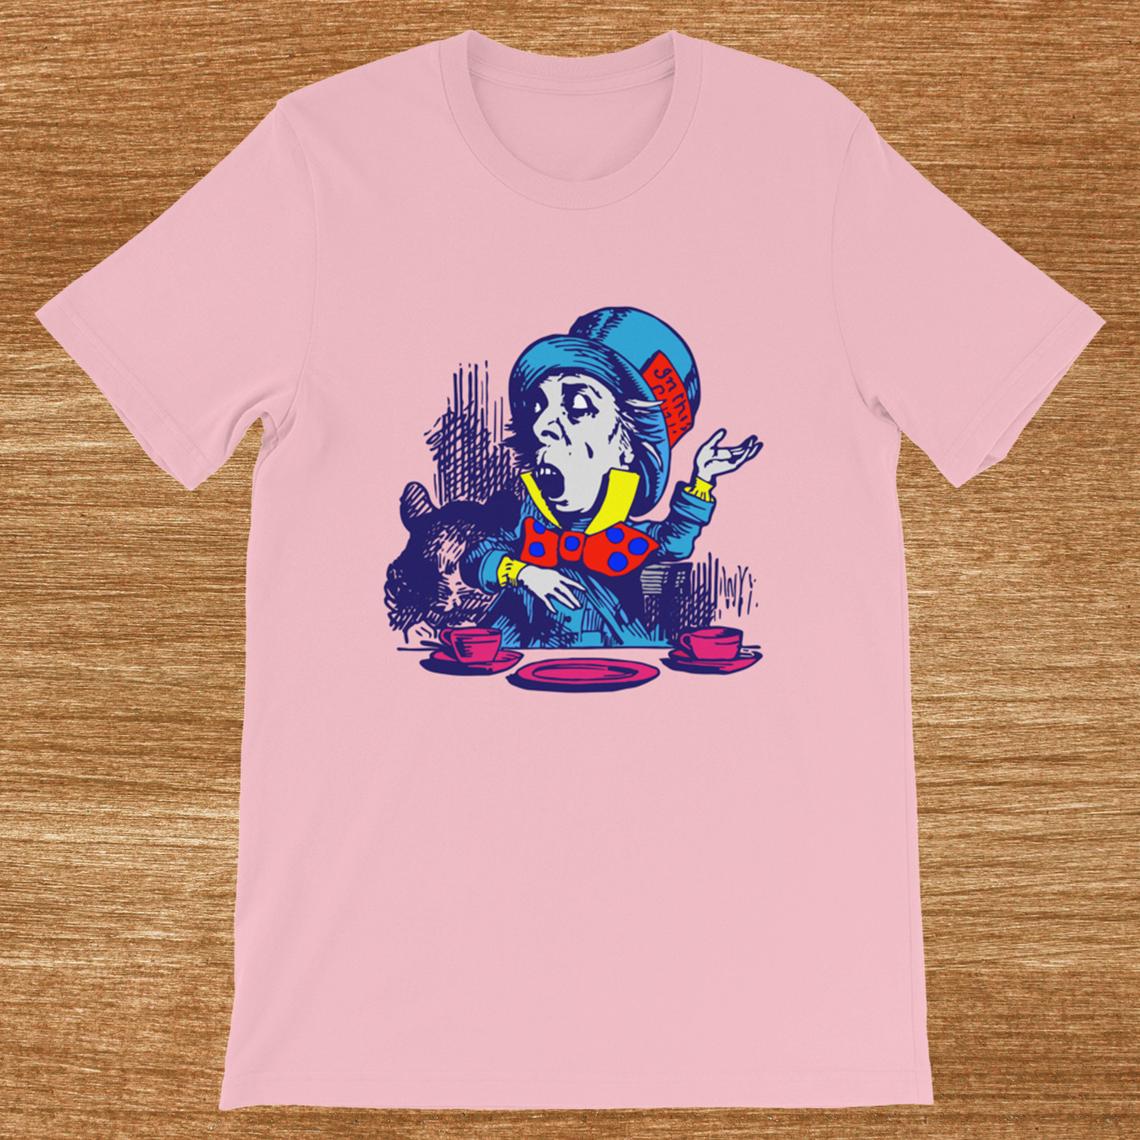 MAD HATTER T-Shirt NA